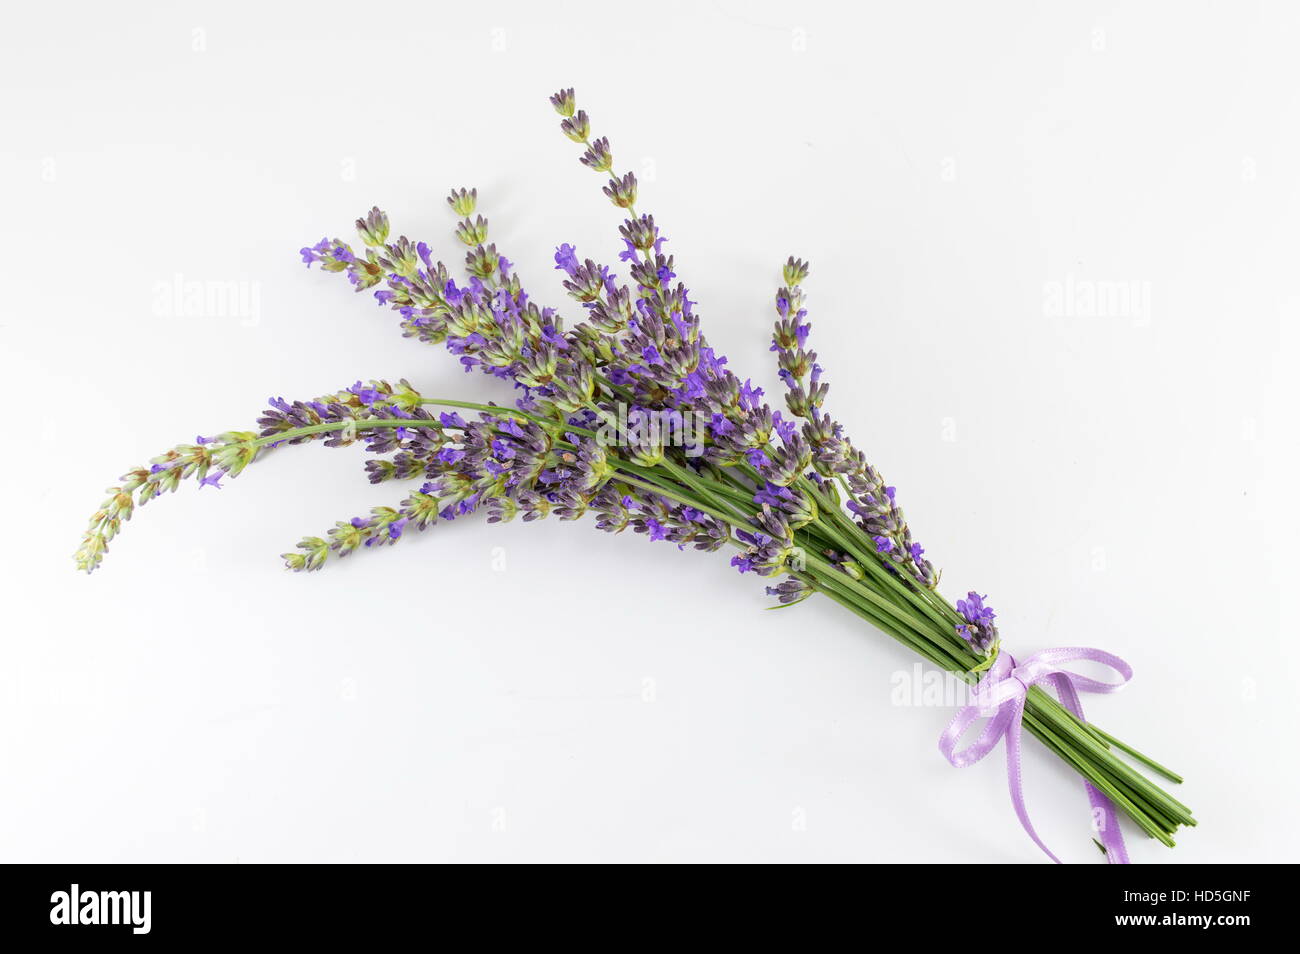 Lavender flower branches bouquet on white background Stock Photo